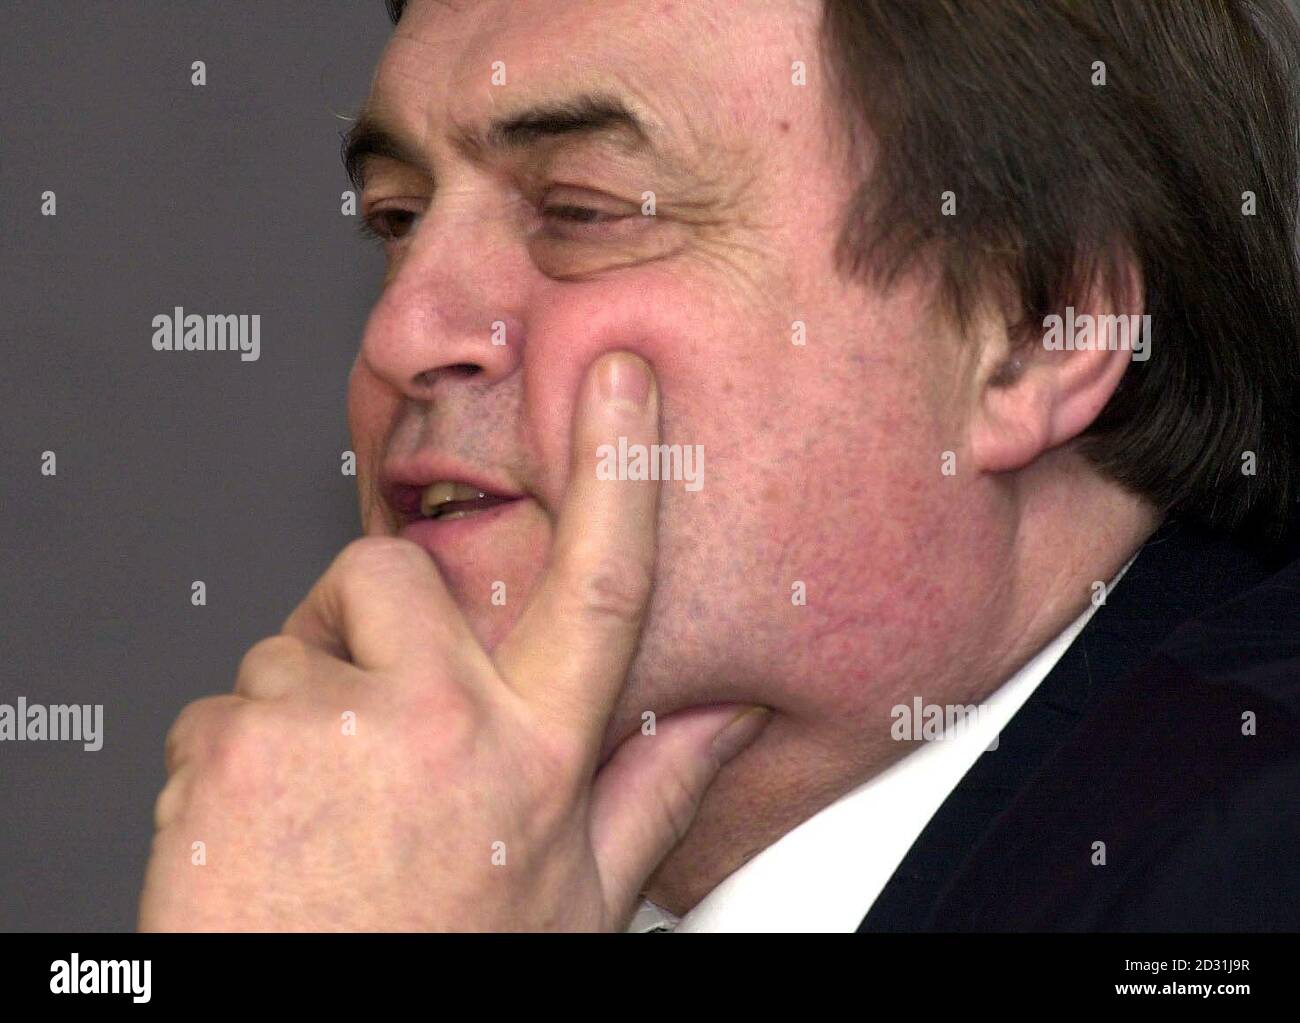 Deputy Prime Minister John Prescott speaks to the media during a press conference about the Marchioness river boat disaster in London.  Mr Prescott said a public inquiry report into disaster on the Thames is to be referred to the Director of Public Prosecutions. Stock Photo